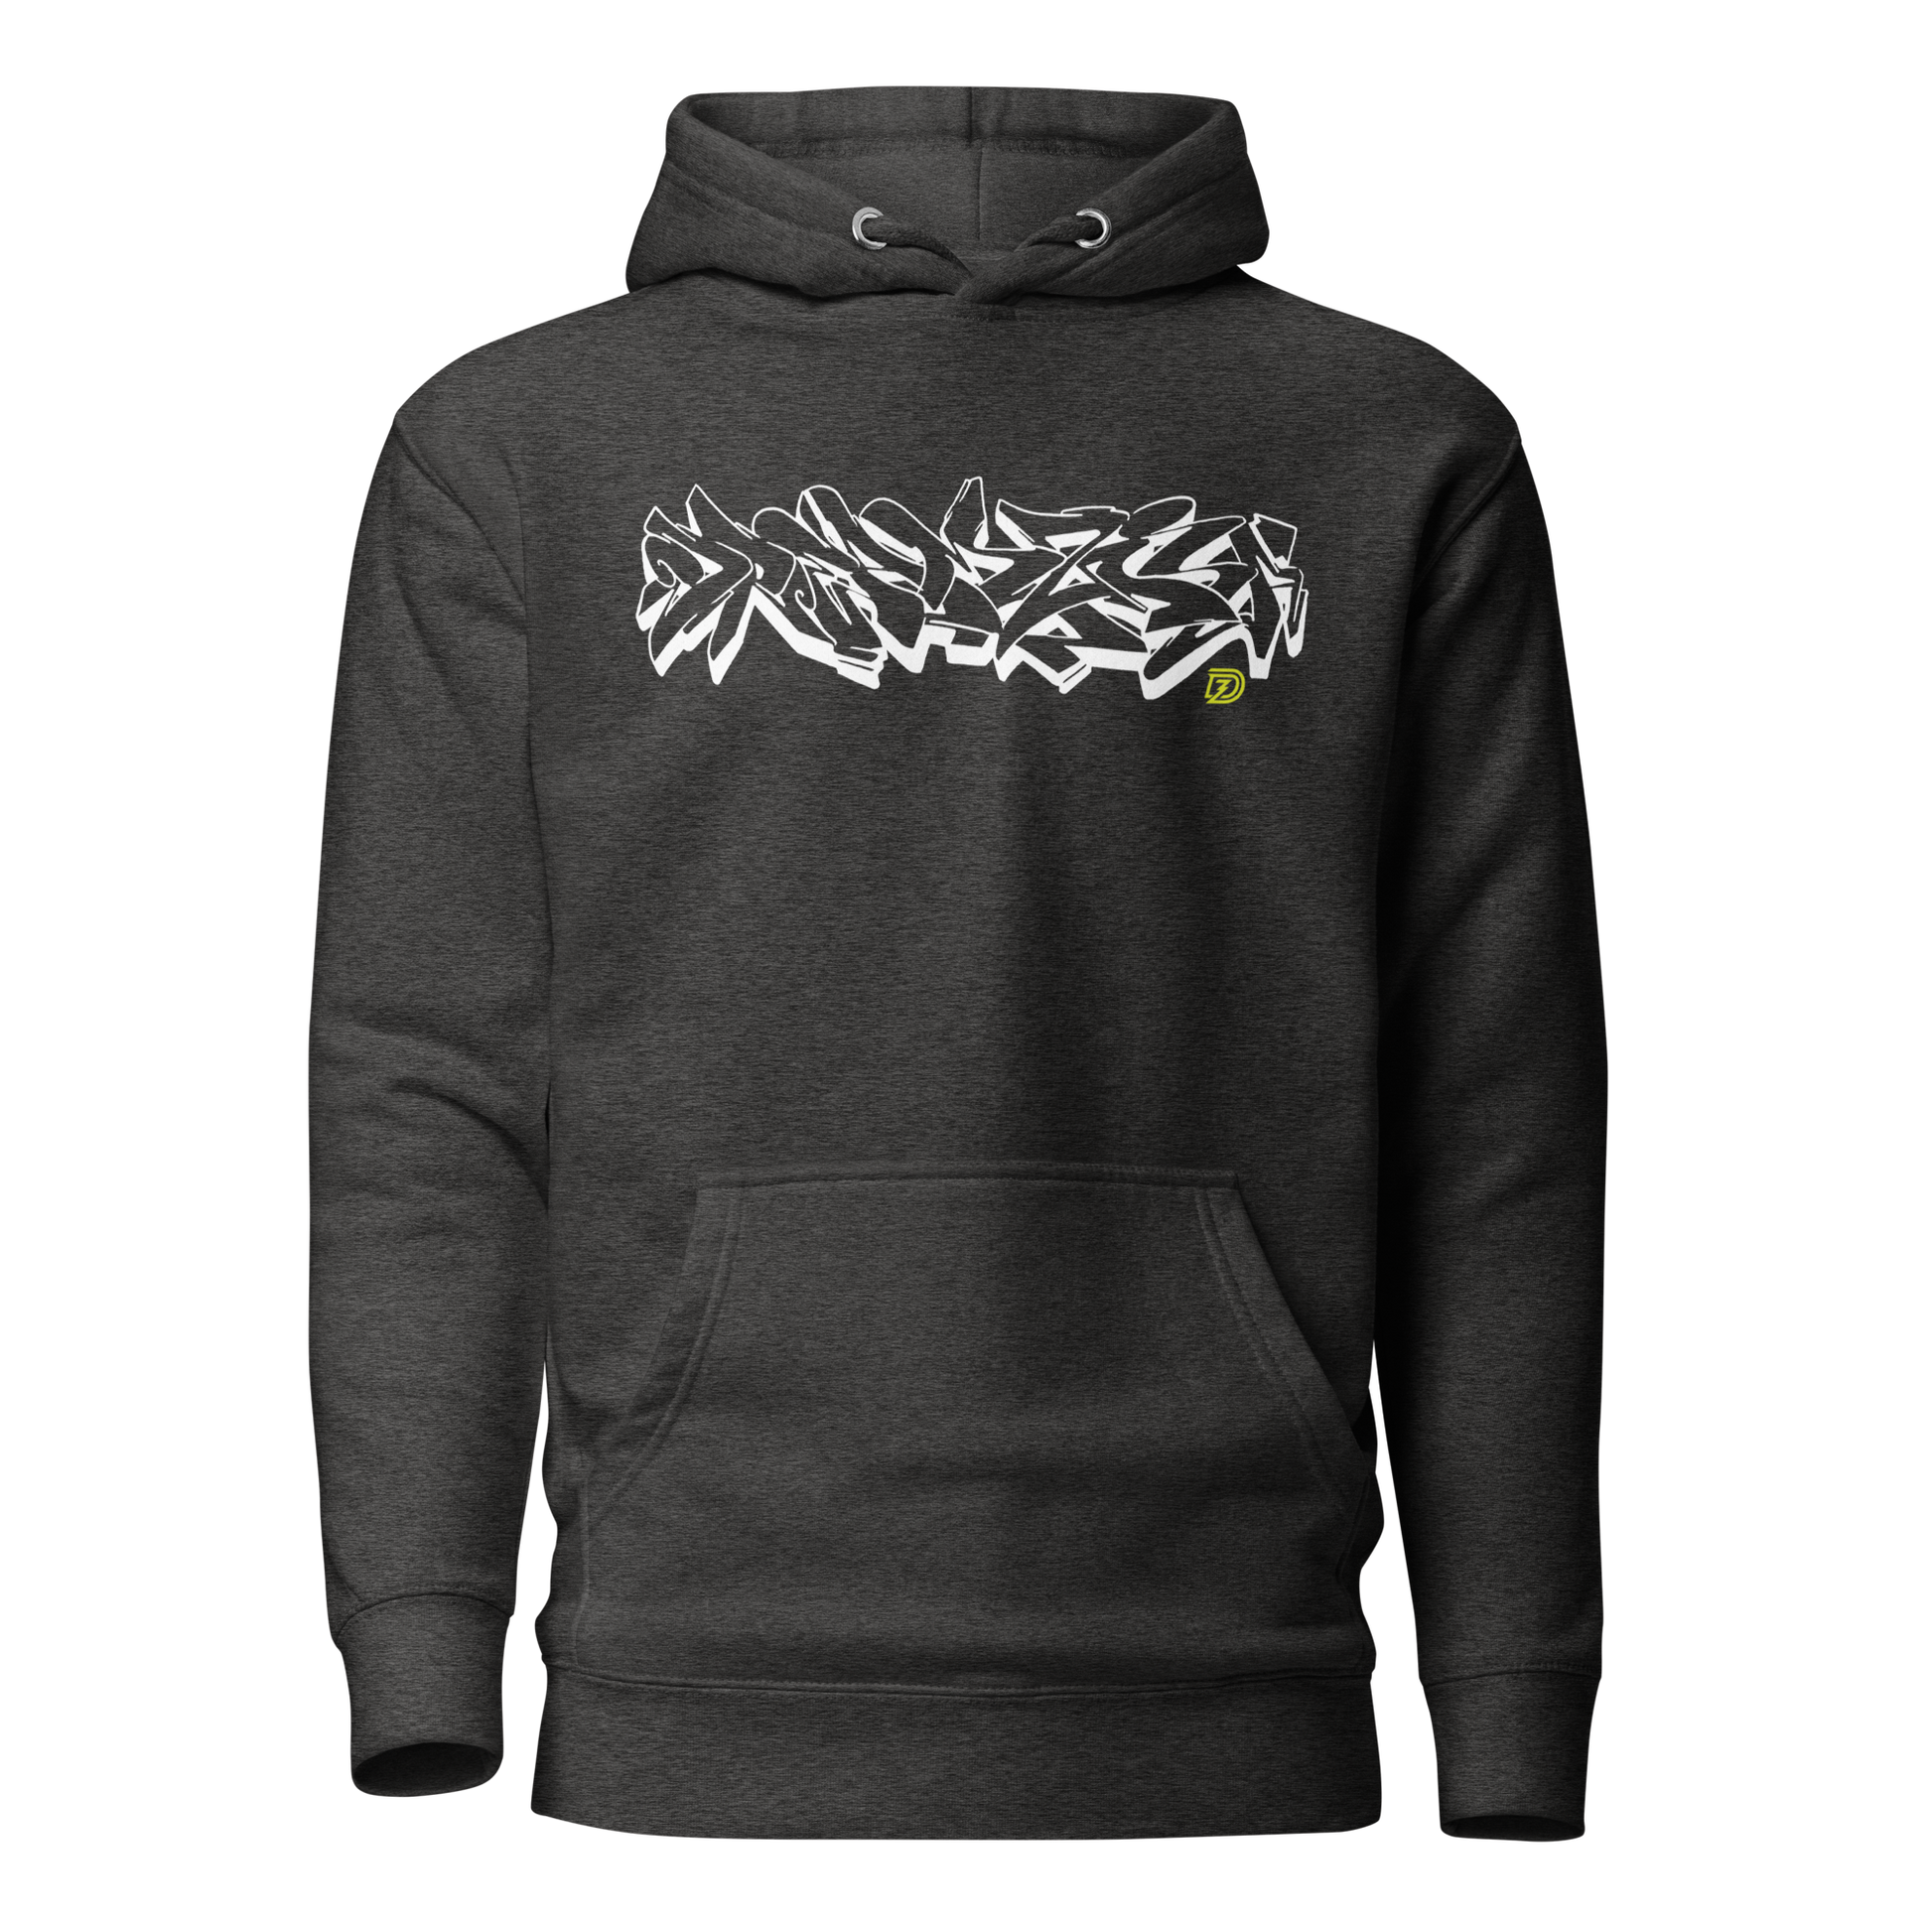 Graffiti Wildstyle 2 by Sanitor Unisex Hoodie in Charcoal Heather